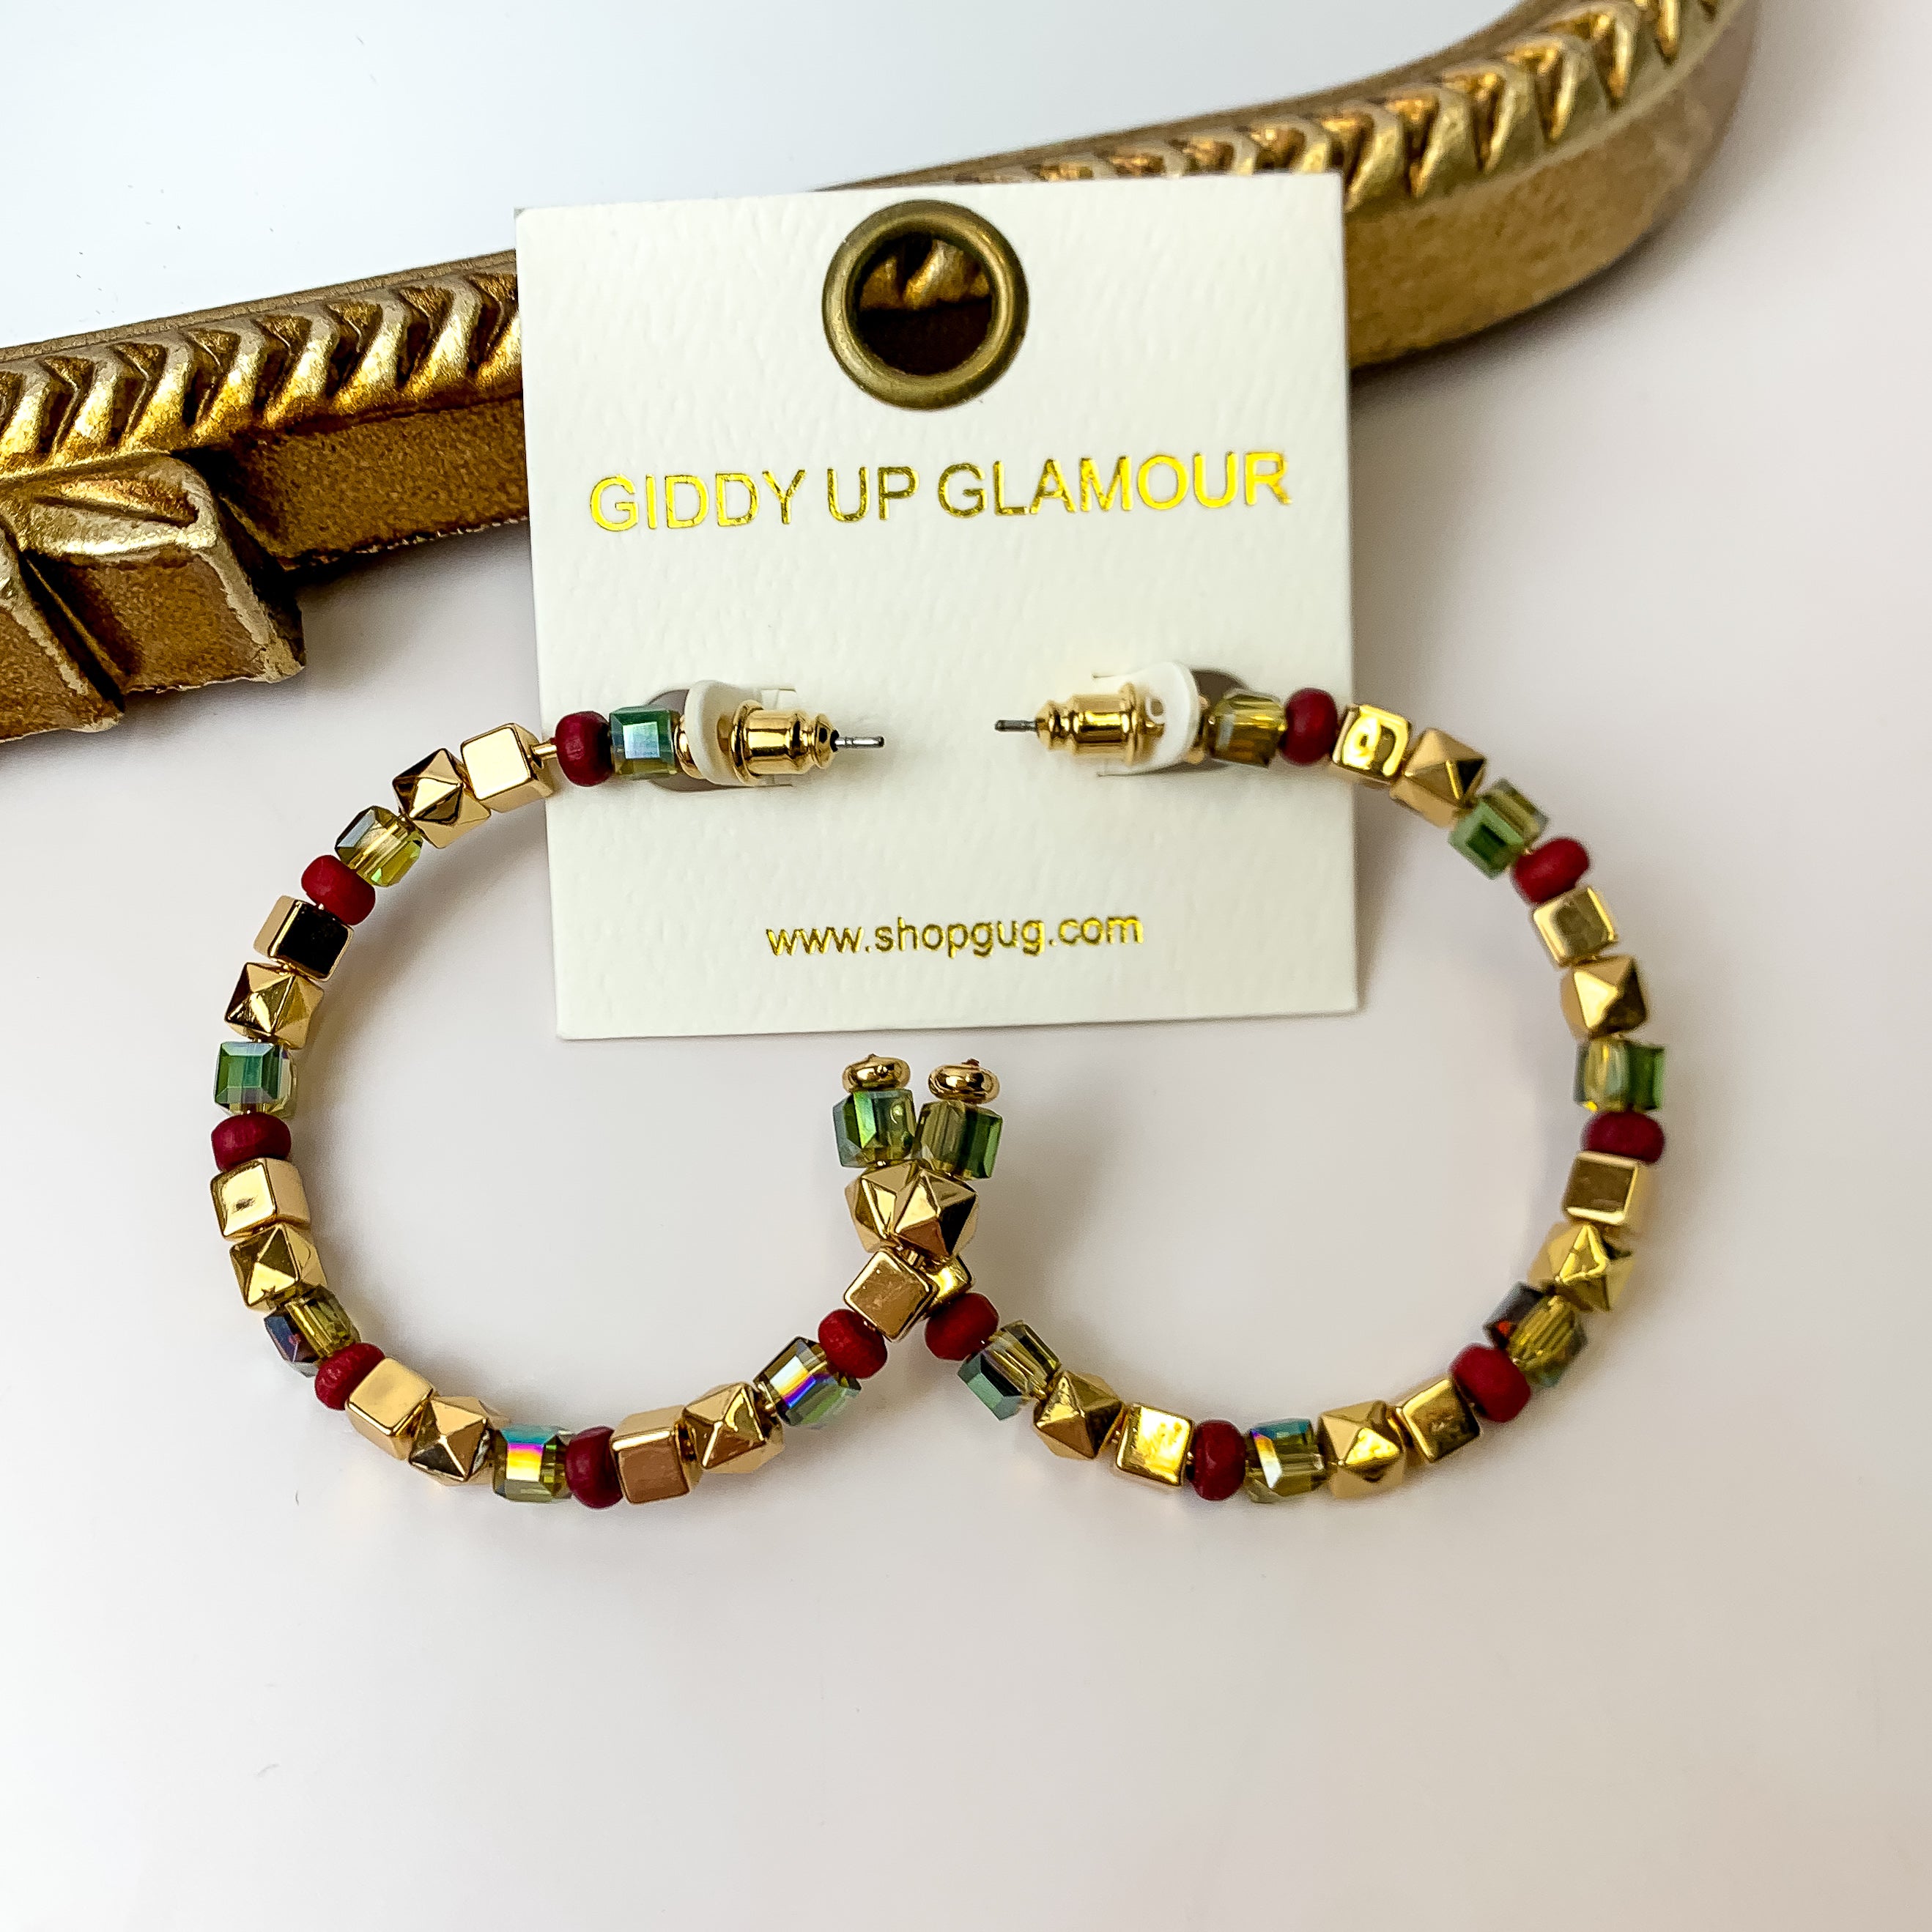 A pair of gold, sage green, and ruby red beaded hoop earrings on an ivory earring card. These earrings are pictured on a white background with a gold mirror.